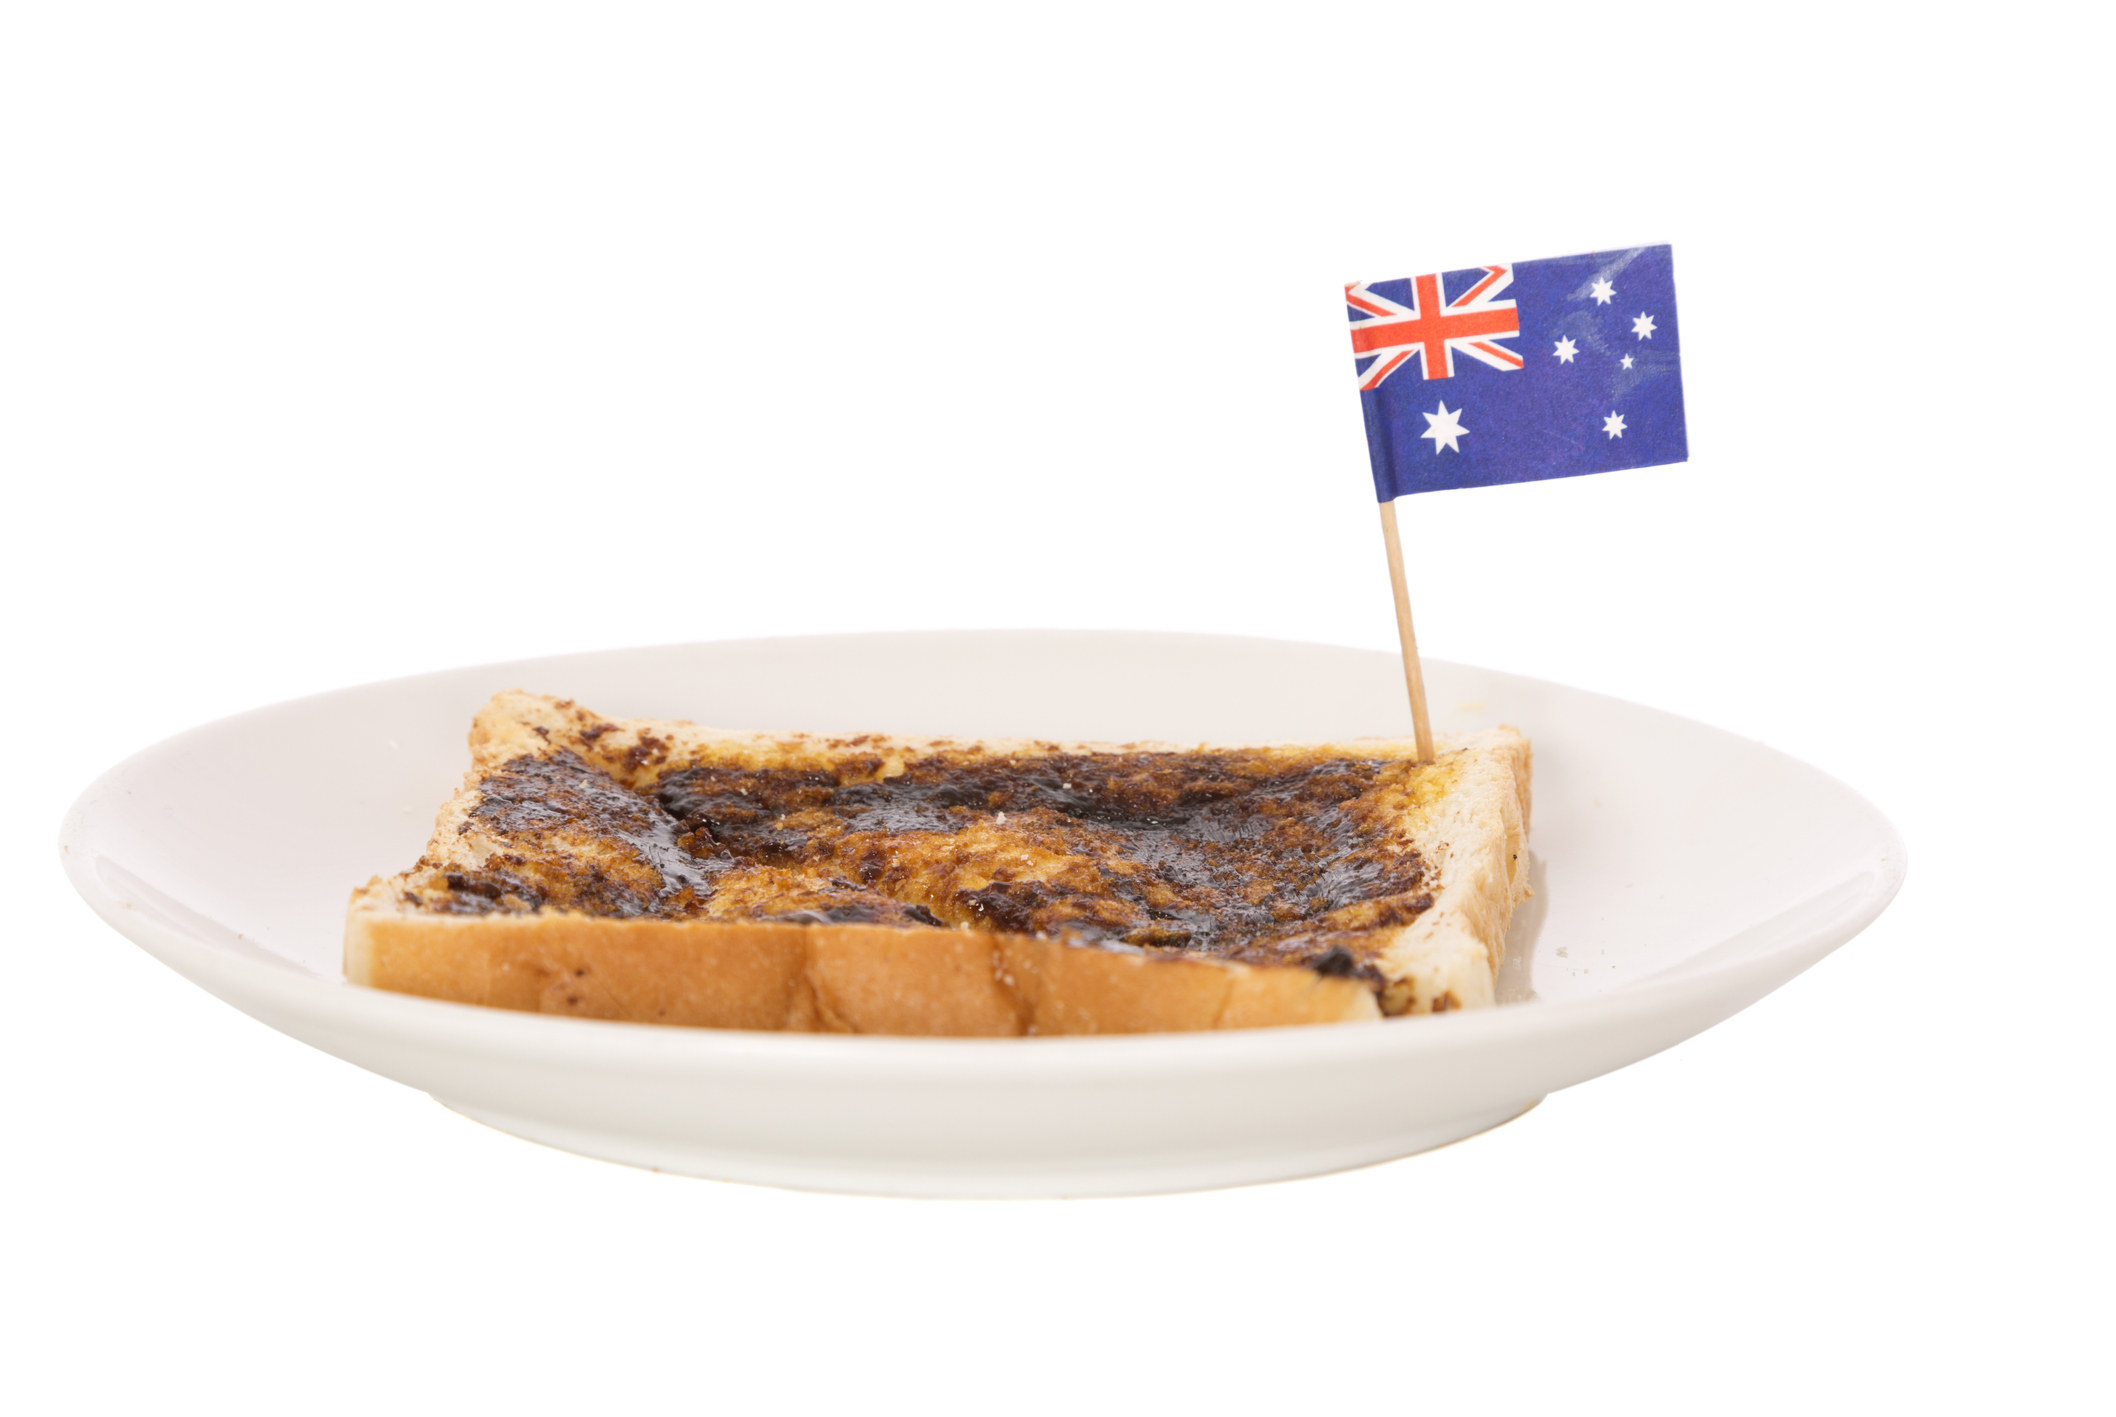 Vegemite on toast with an itty bitty Australian flag sticking out of it